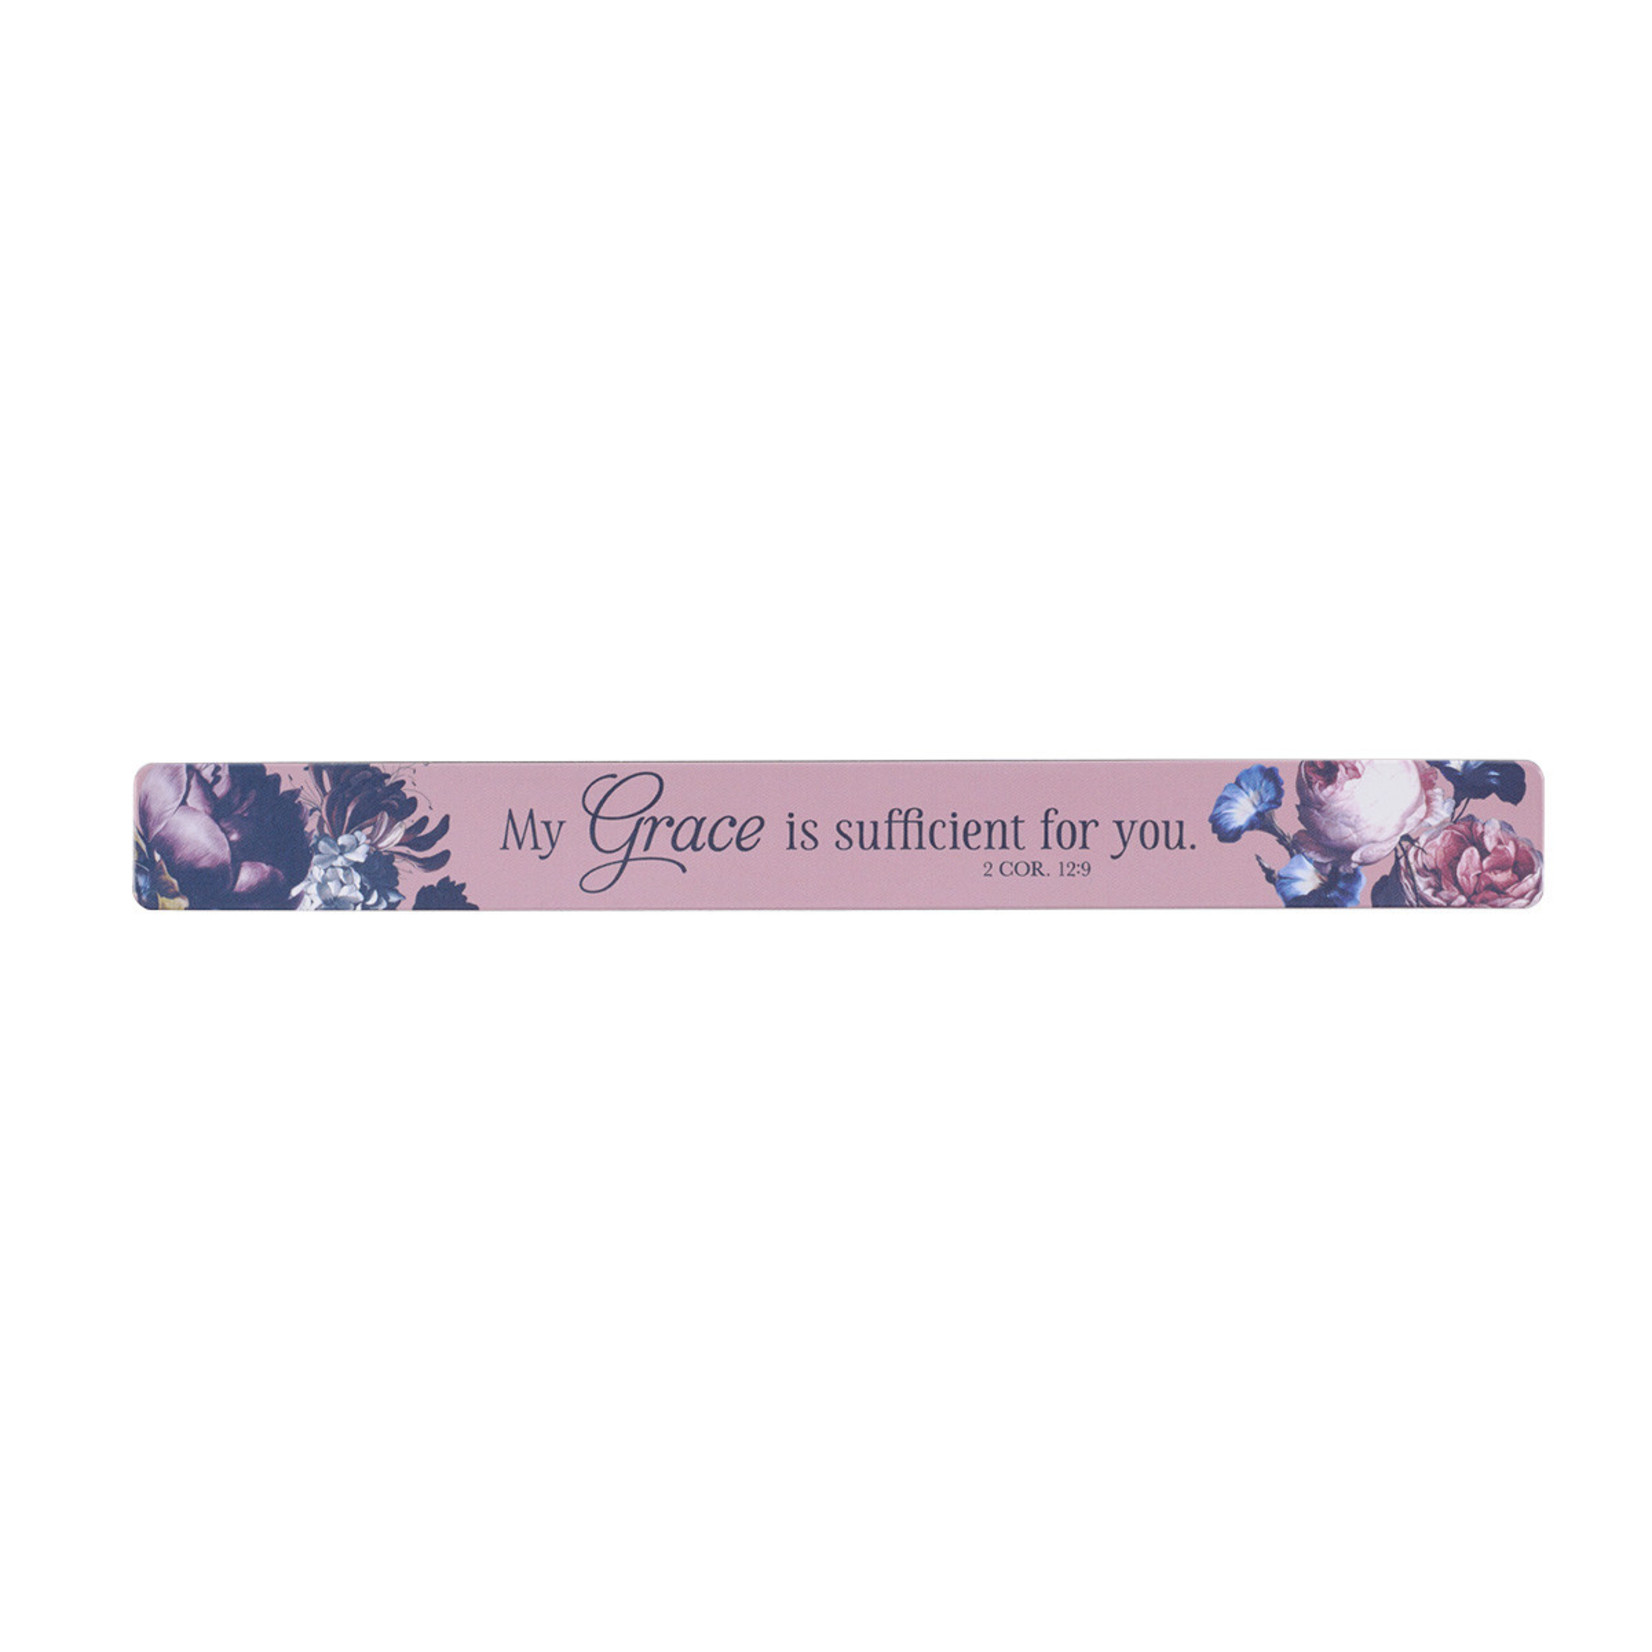 Christian Art Gifts My Grace is Sufficient Pink Magnetic Strip - 2 Corinthians 12:9